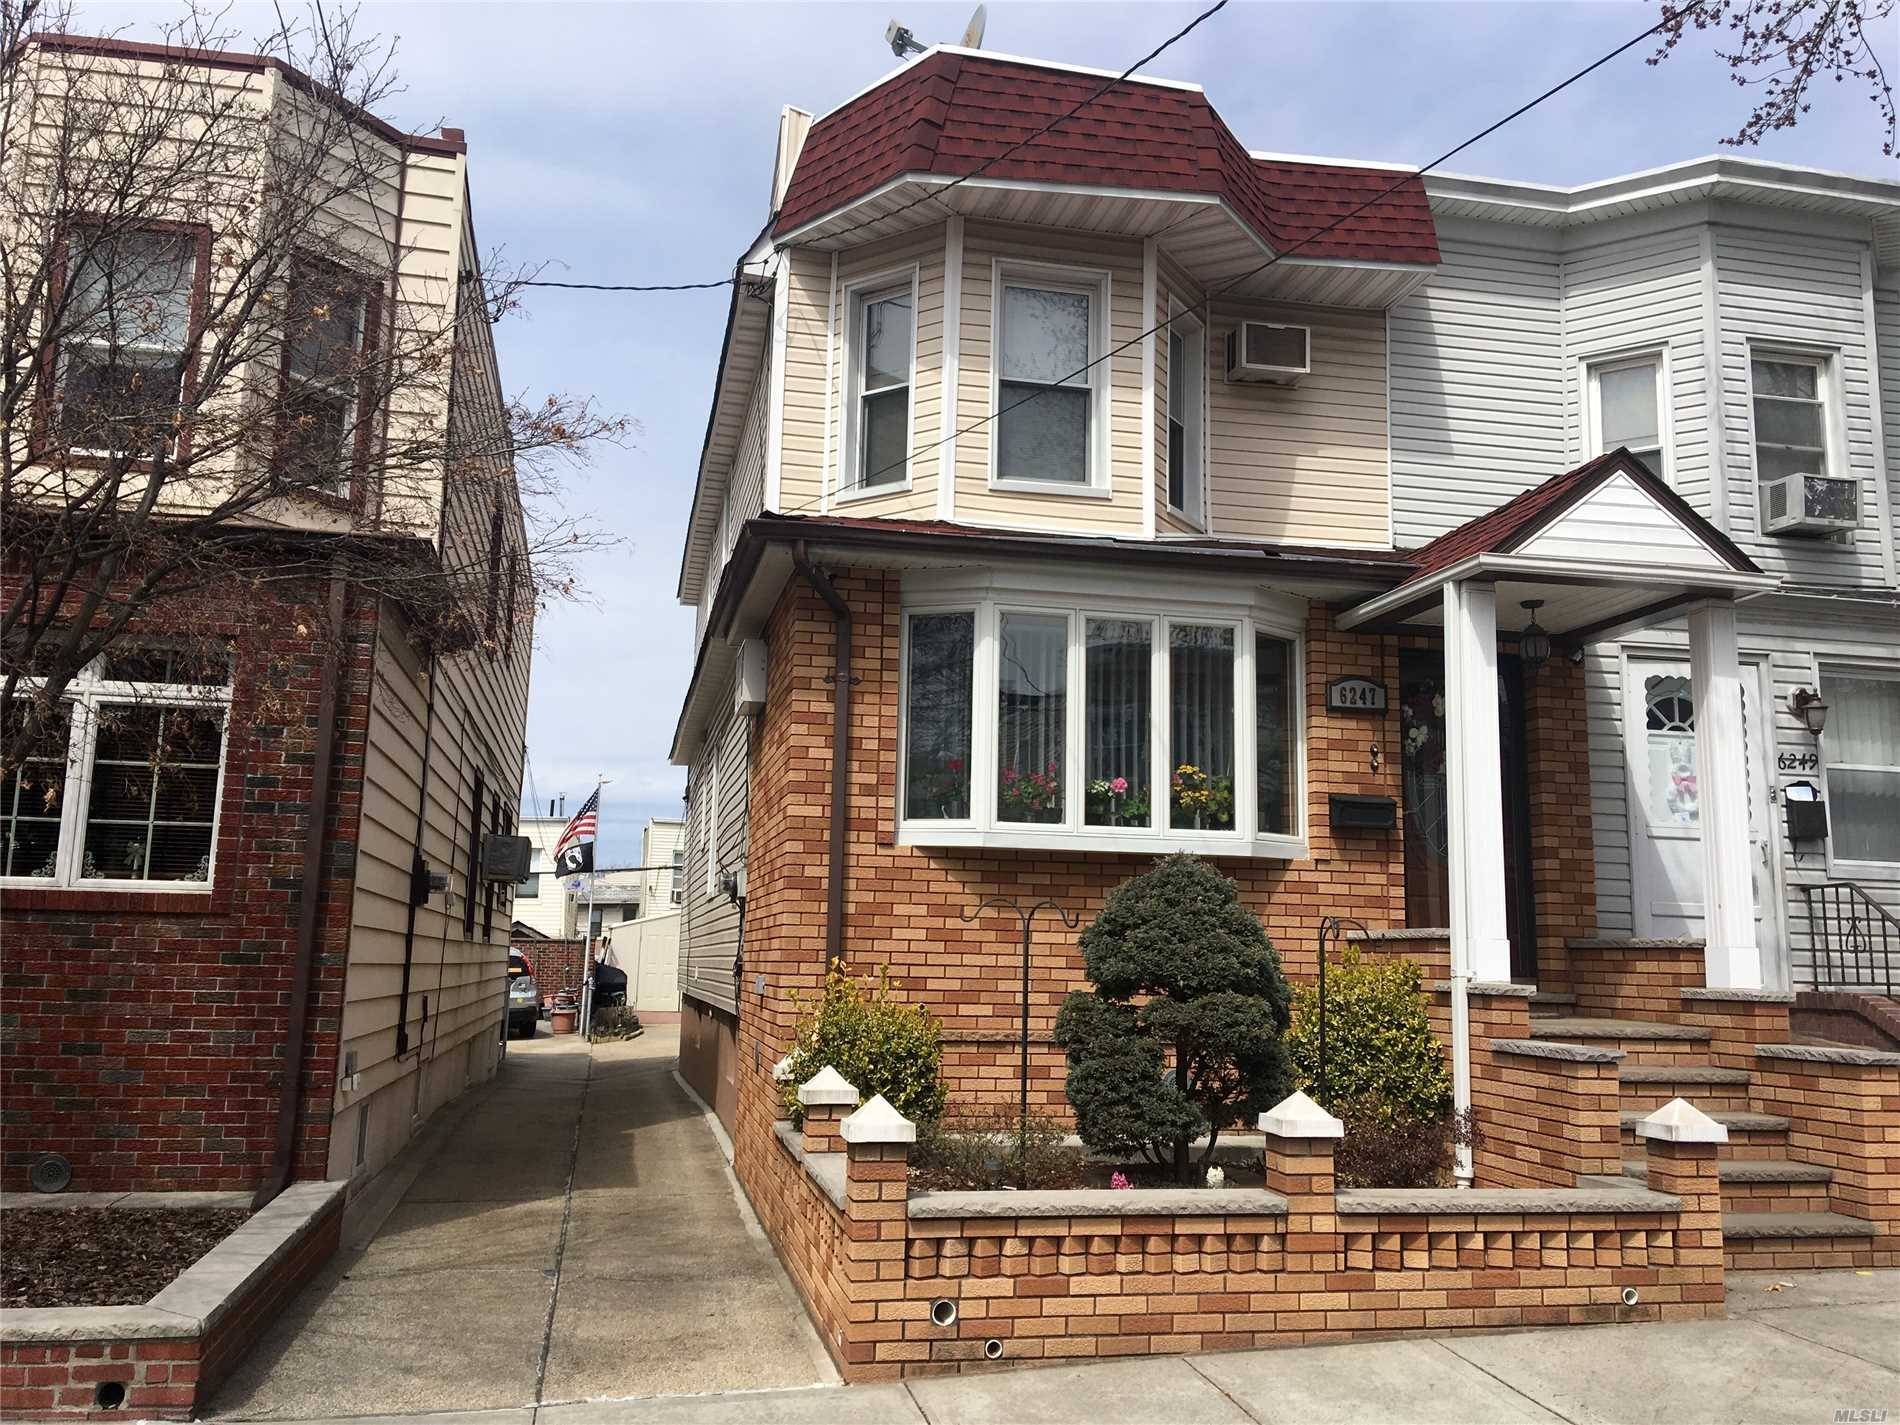 Renovated Semi-Detached 2 Family House, Currently Used As A 1 Family House Located In The Maspeth/Ridgewood Area.